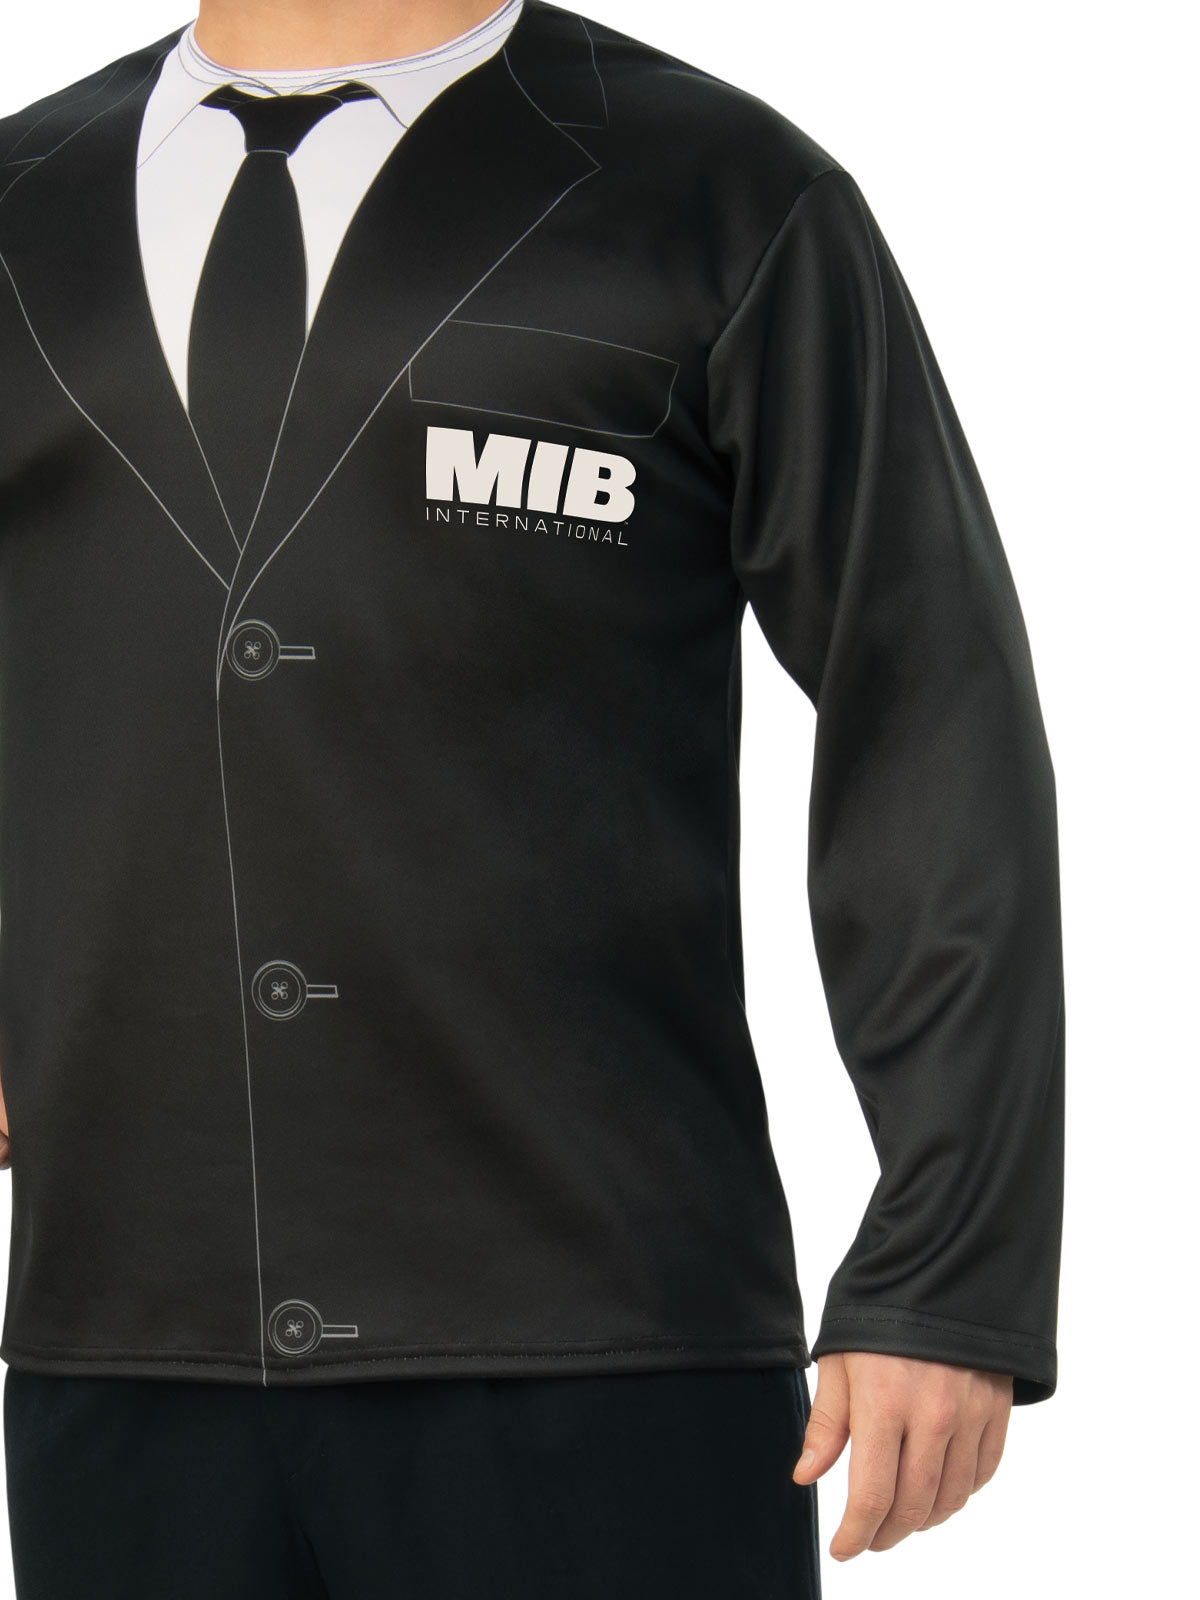 Rubies Mib:4 Agent H Male Adult Costume Top (Size Standard)